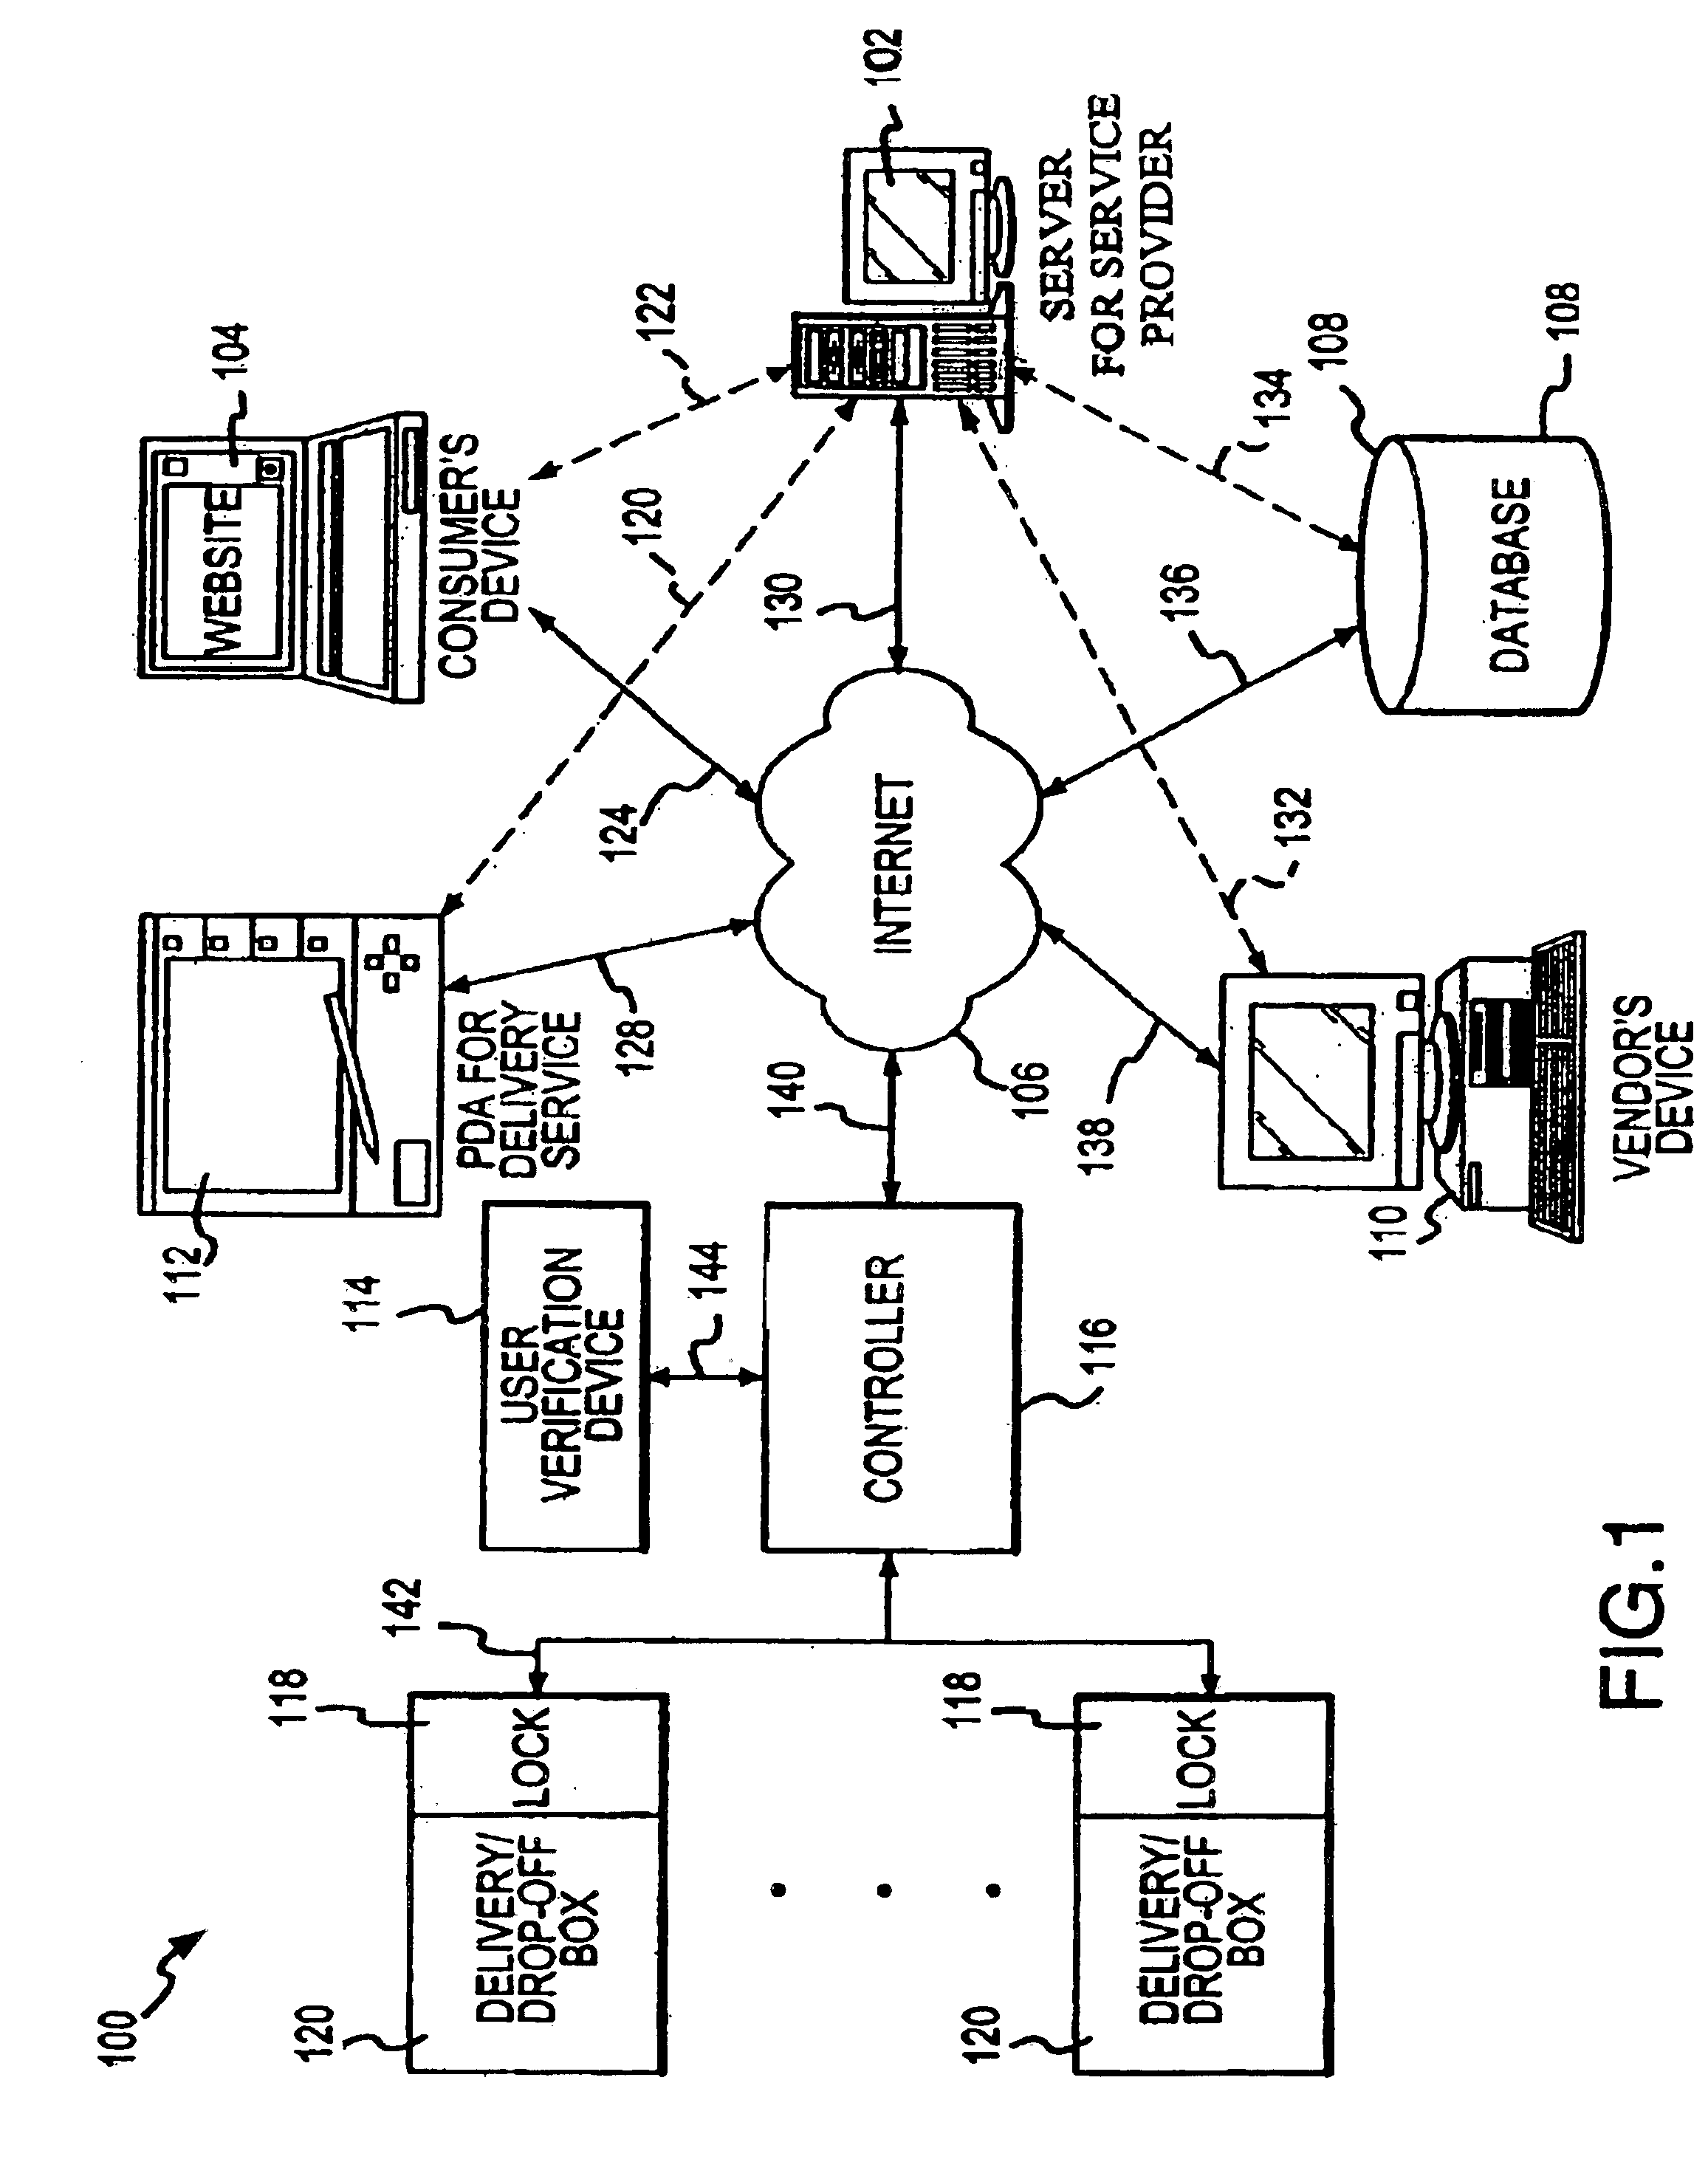 System and method for remotely coordinating the secure delivery of goods